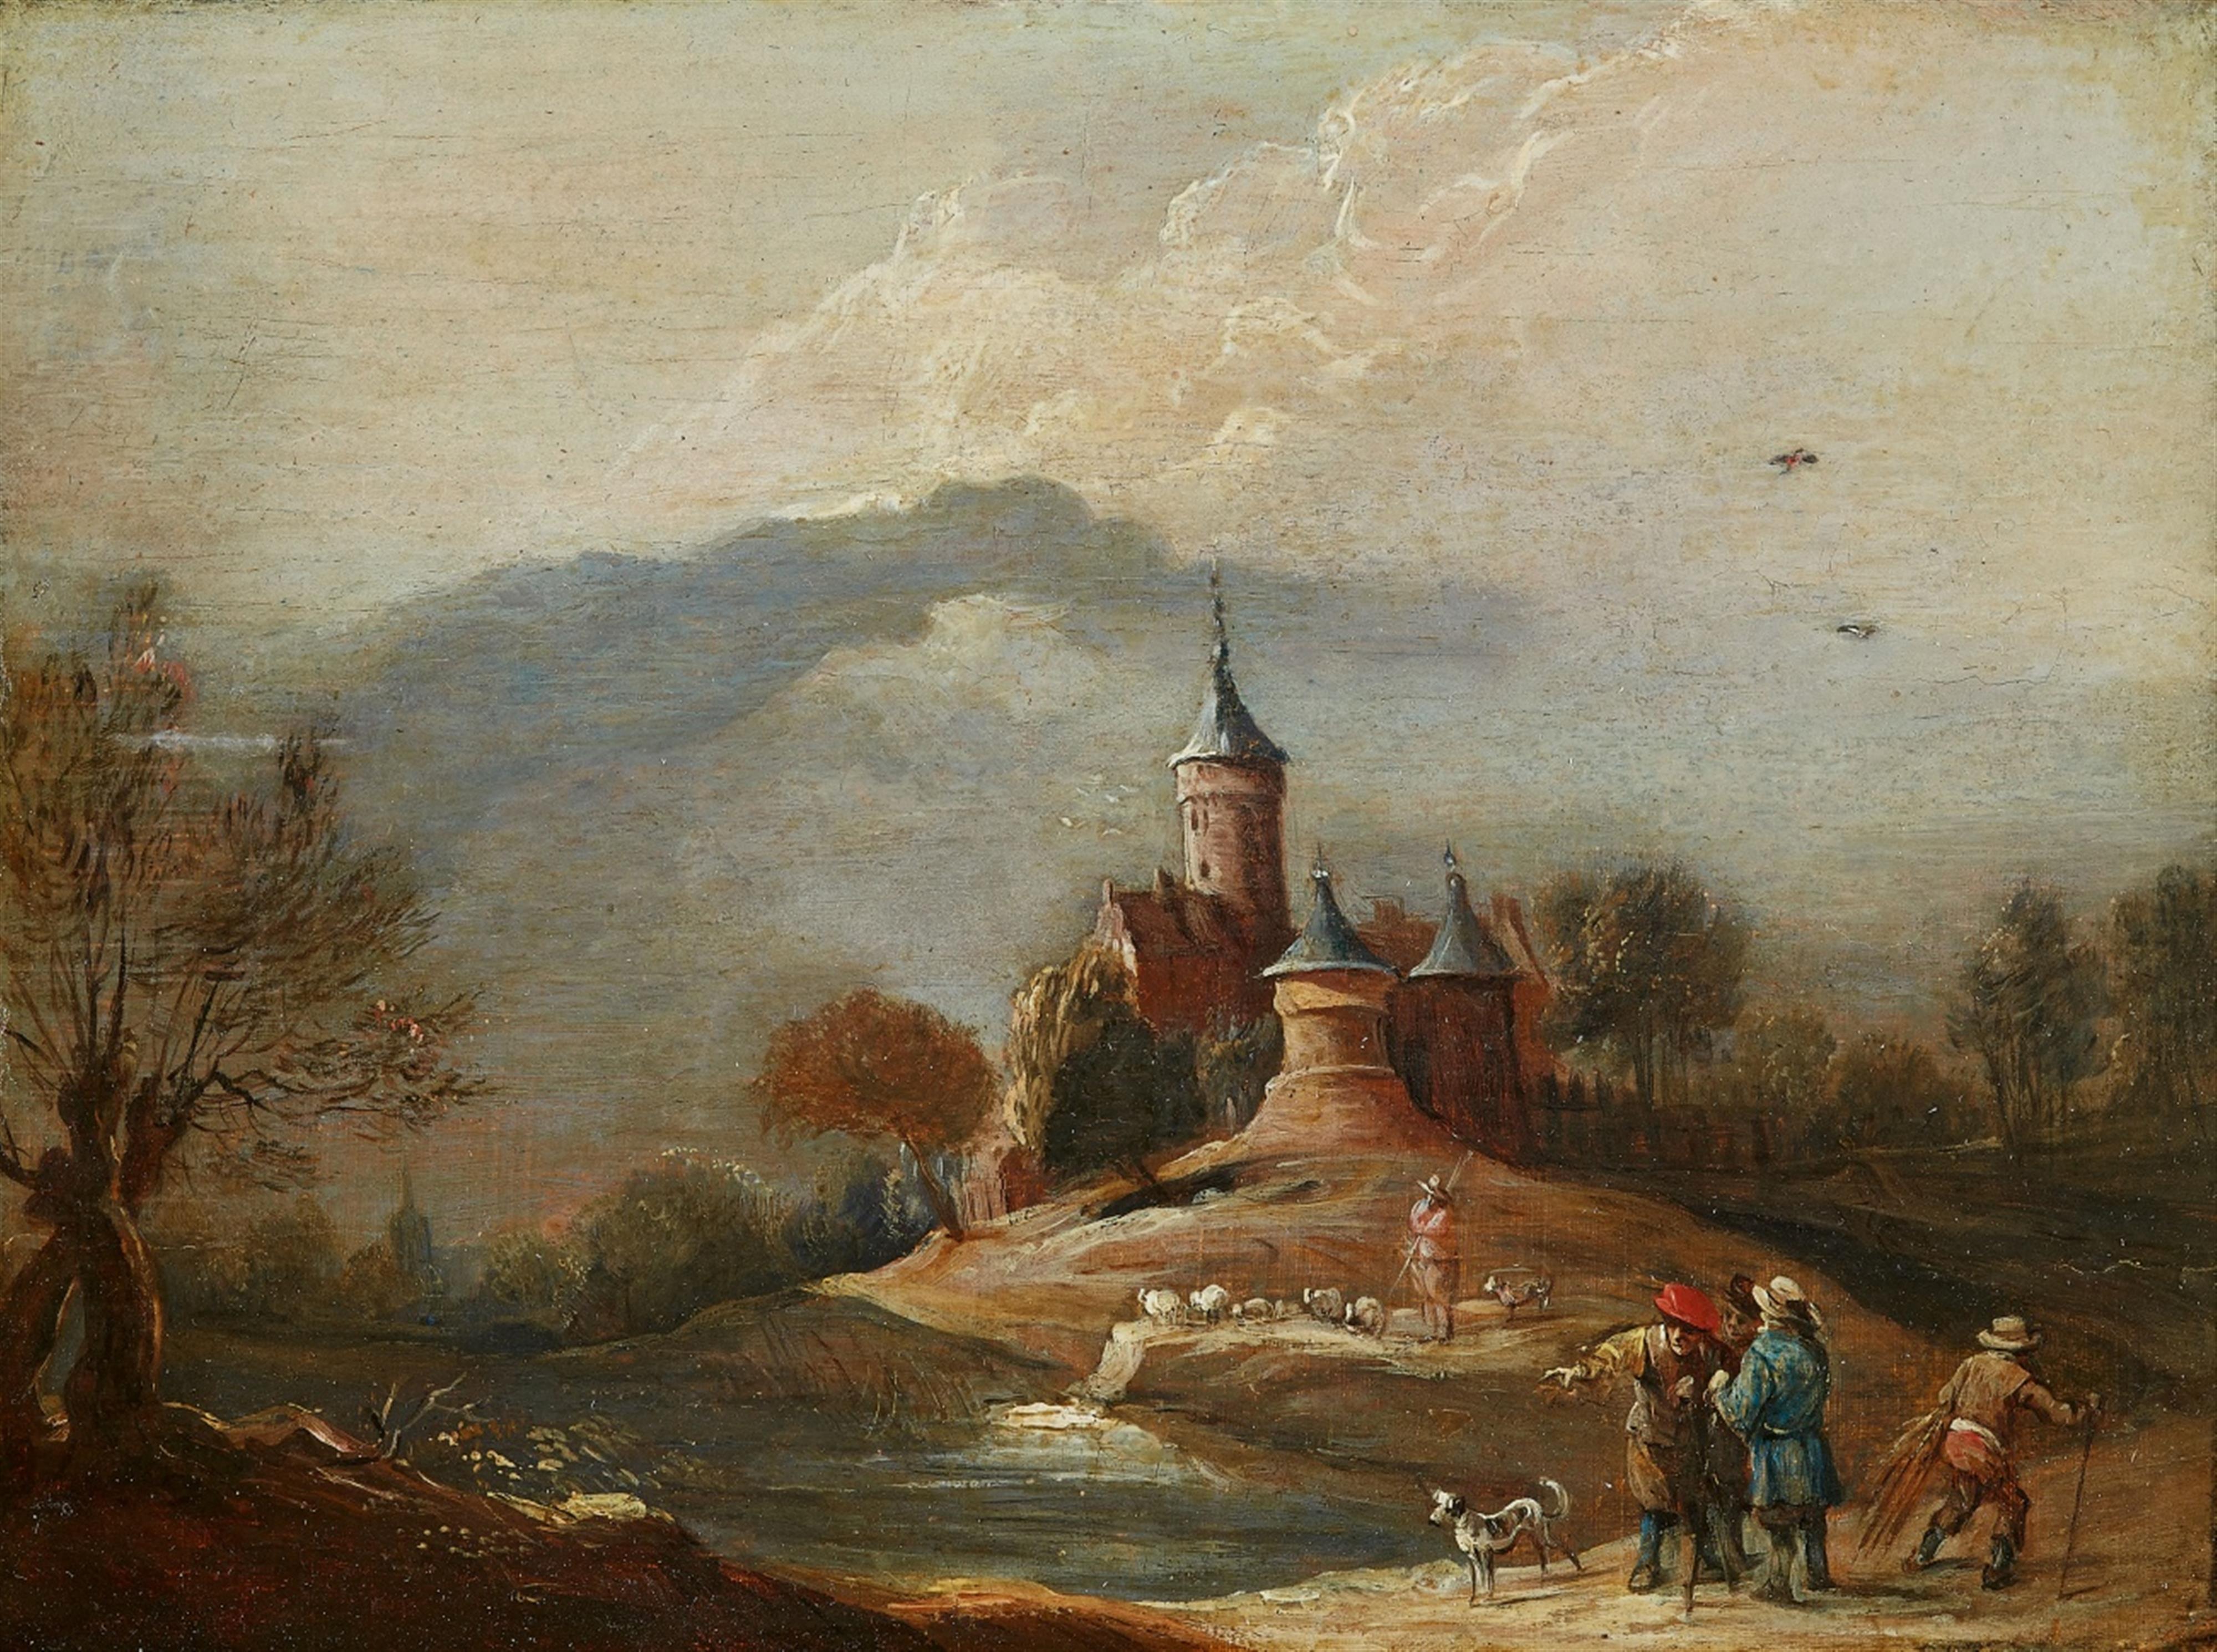 Flemish School 17th/18th century - Small Landscape with a Castle and Figures - image-1